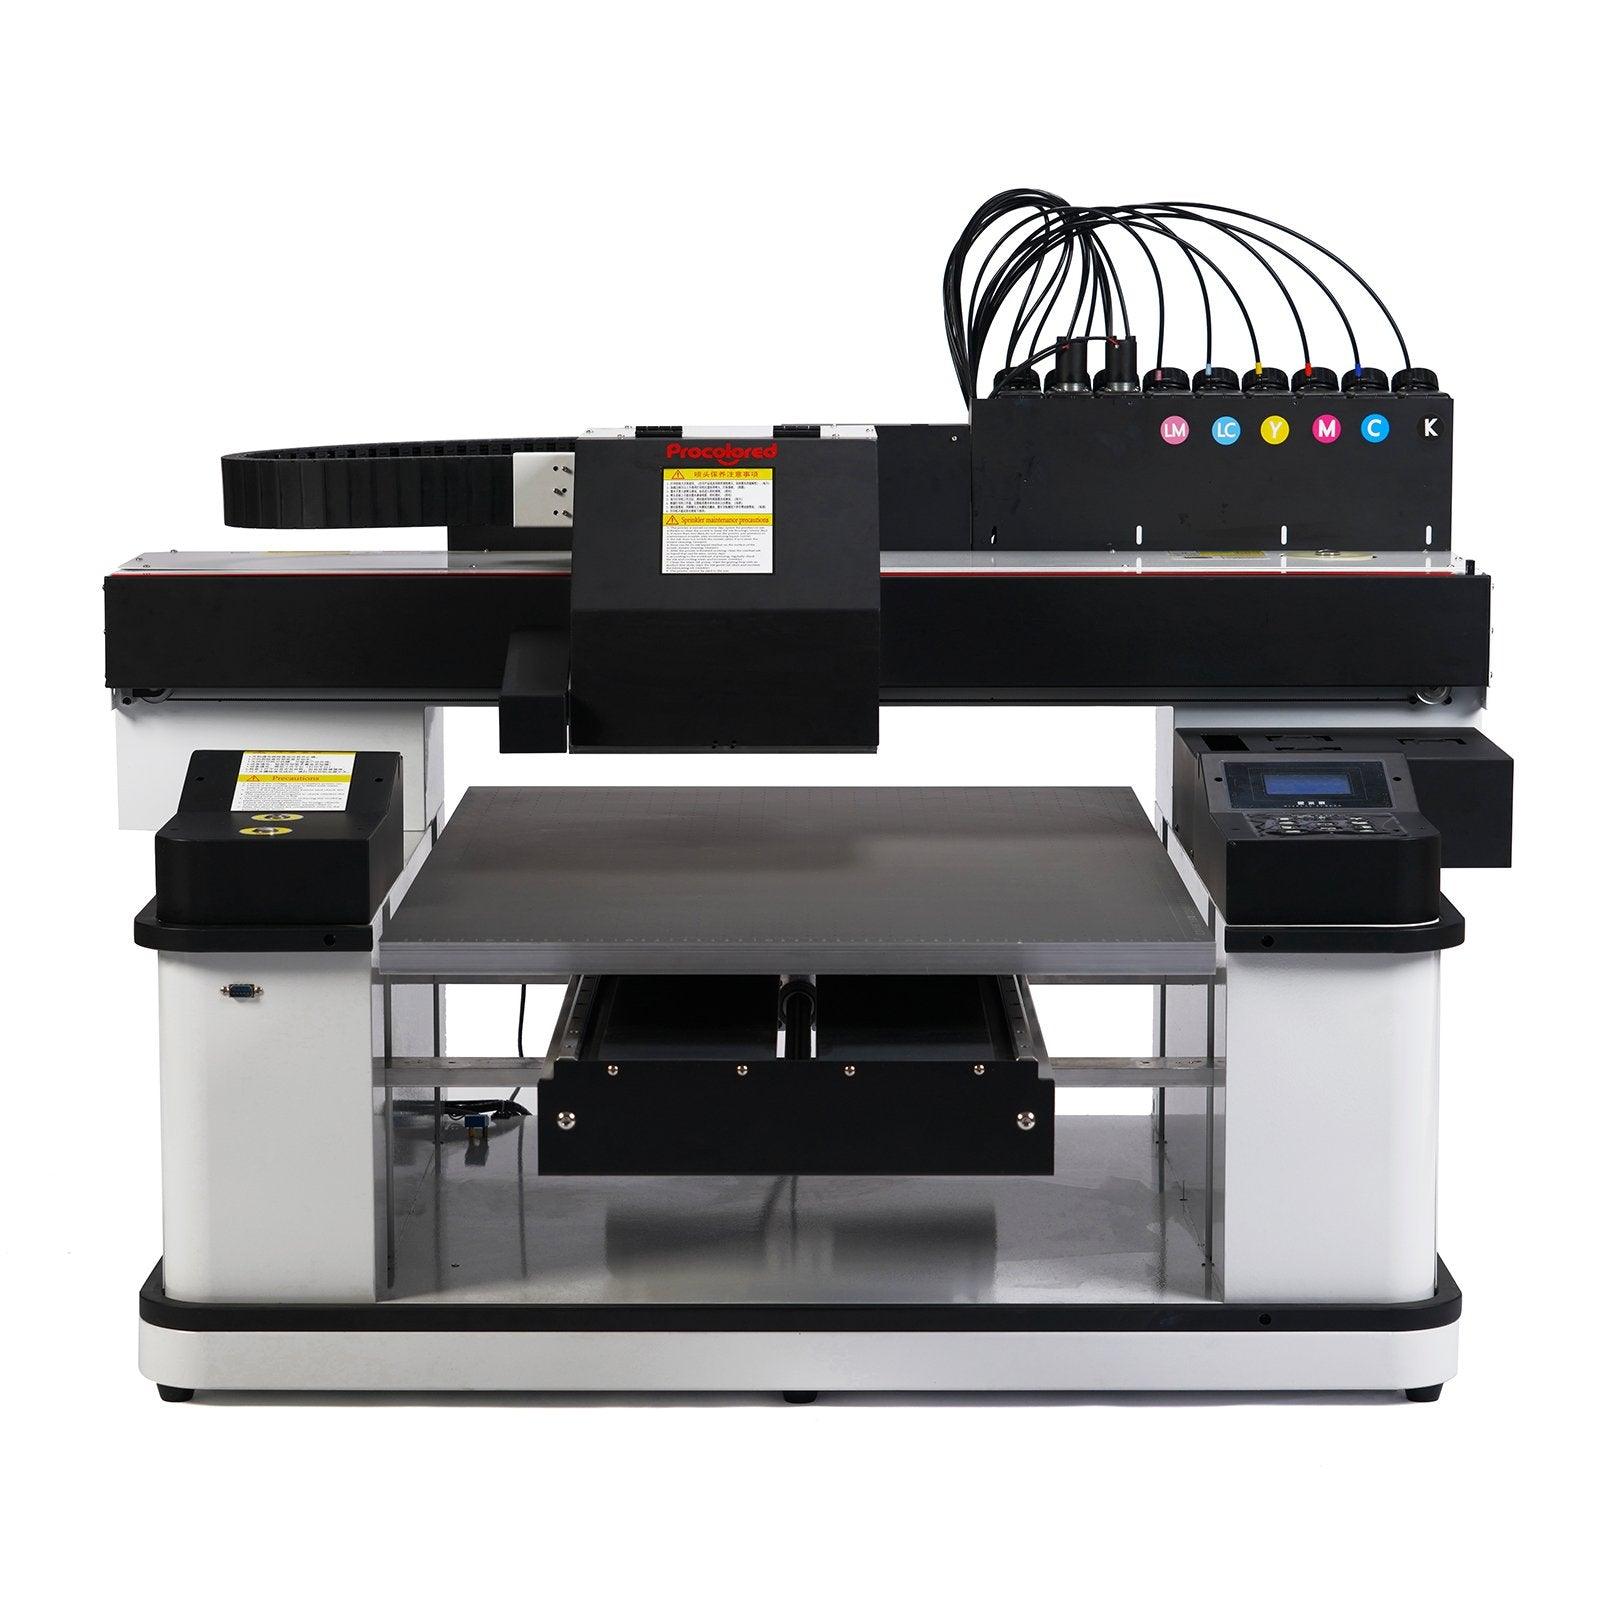 36" Dual/Three Heads Array Fast DTG Printer XP600 - Procolored